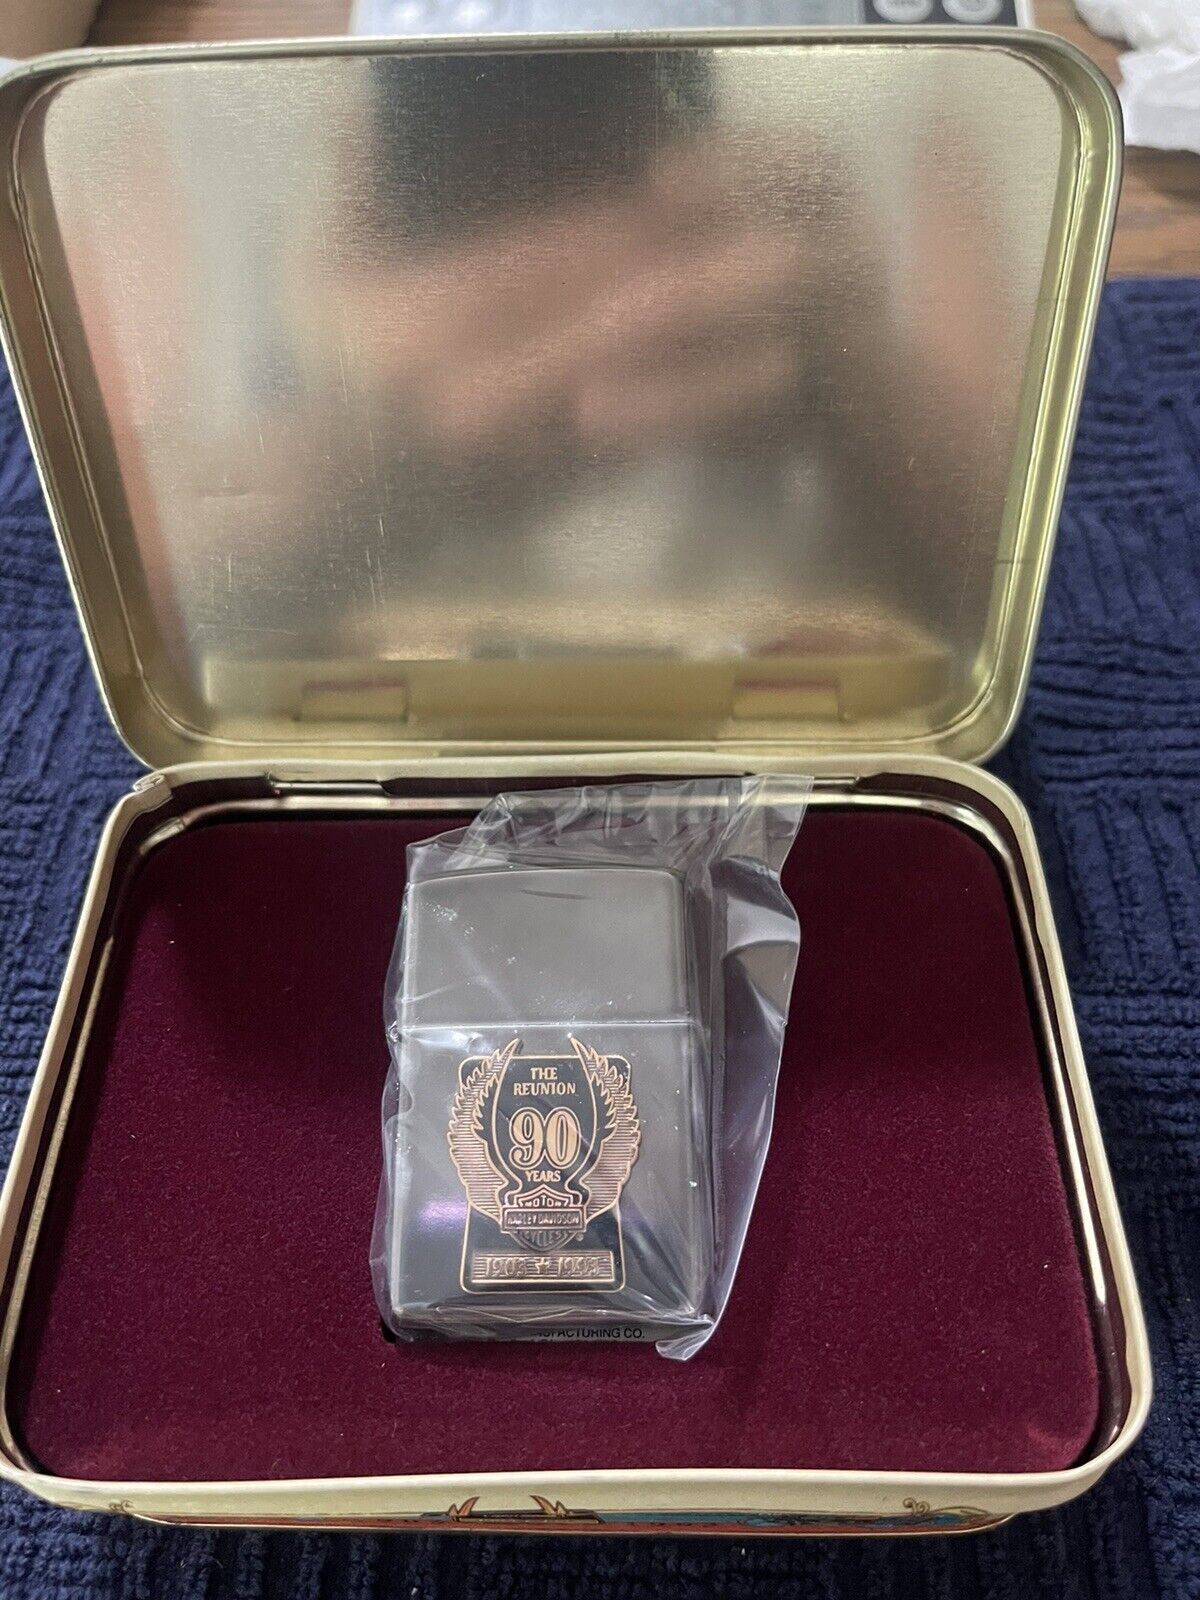 1993 HARLEY DAVIDSON ZIPPO~THE REUNION~90 YEARS~MINT CONDITION ~ NEW OLD STOCK